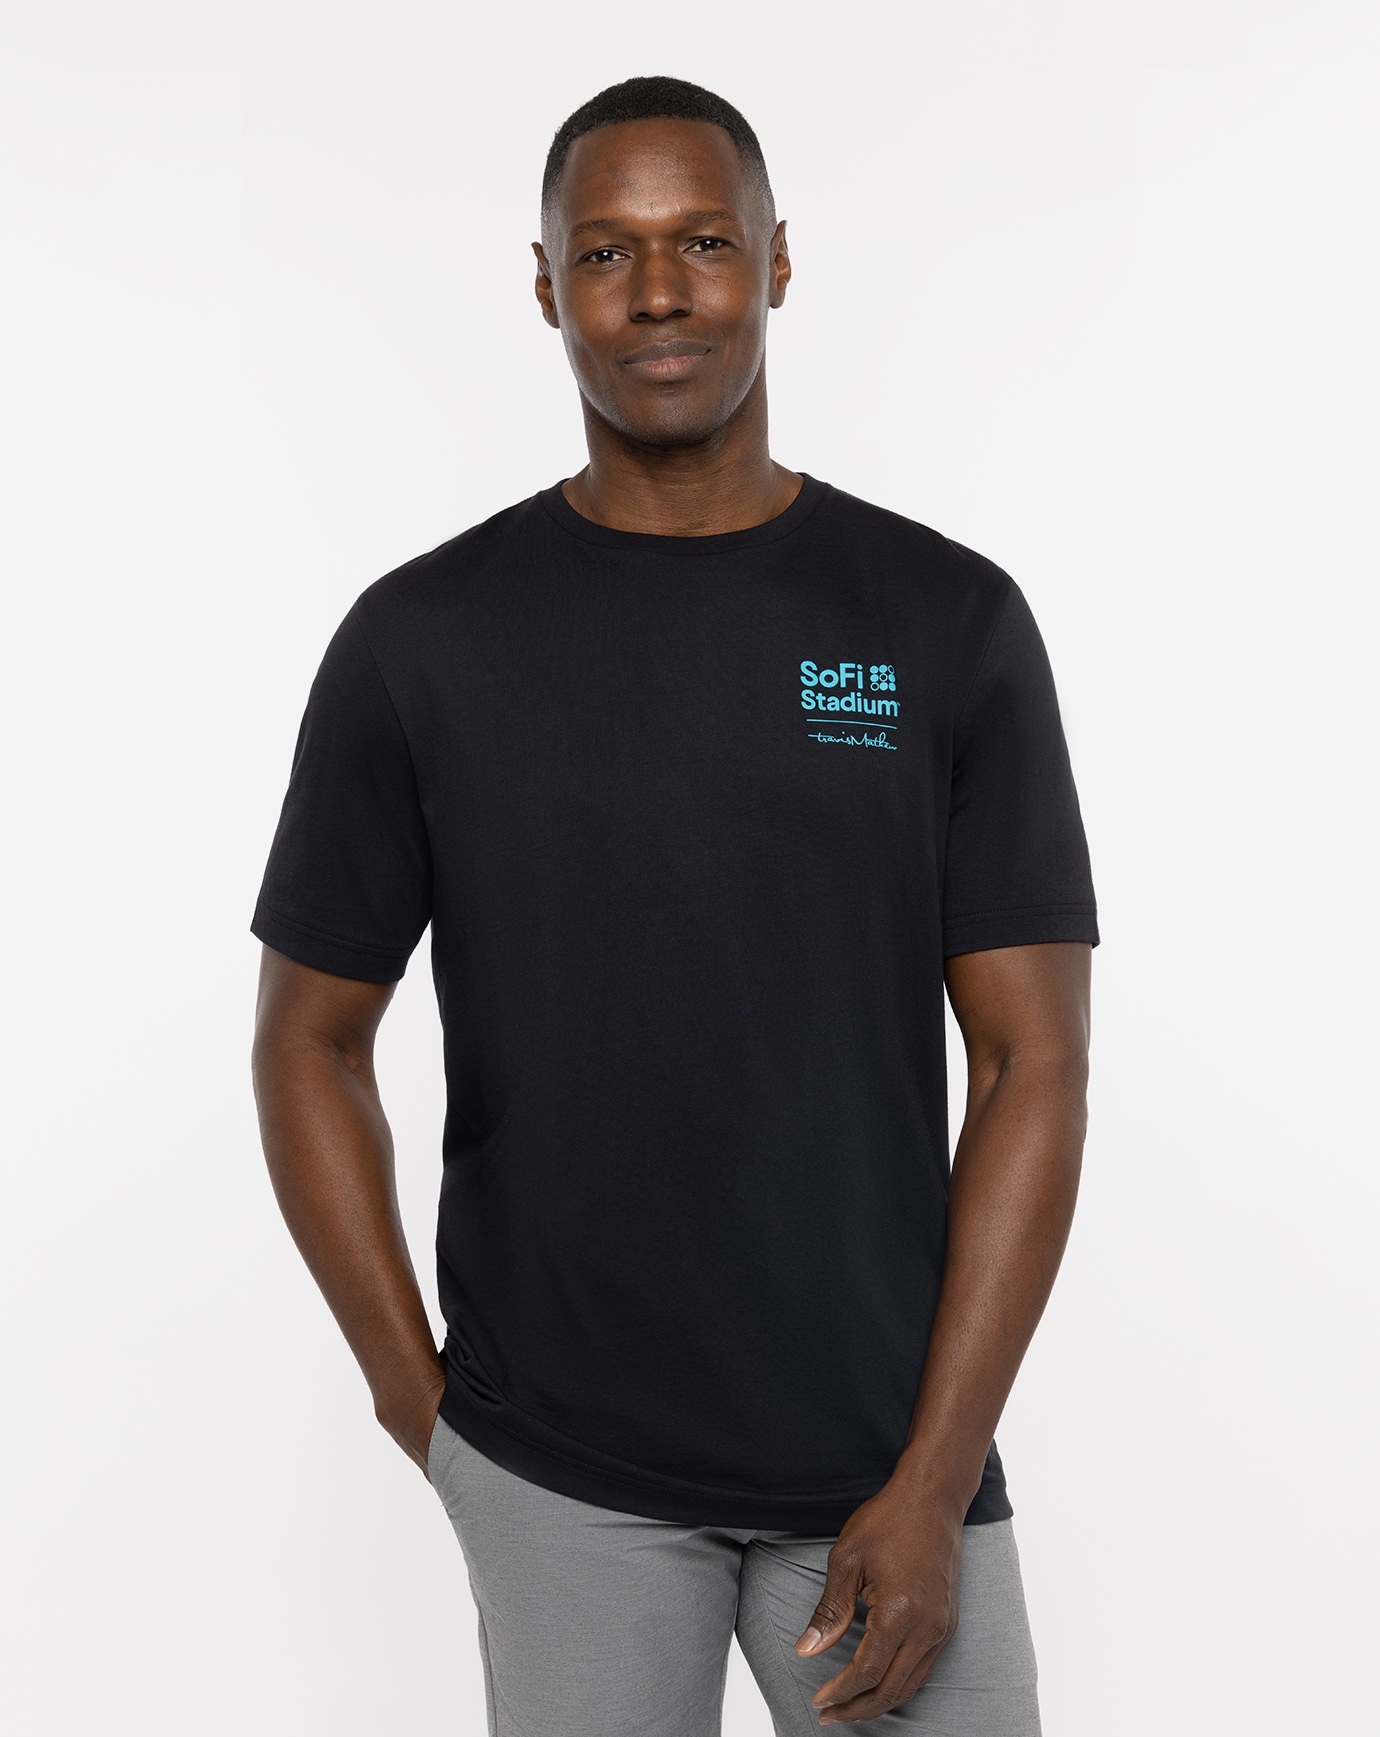 Related Product - SPORTSMANSHIP TM TEE